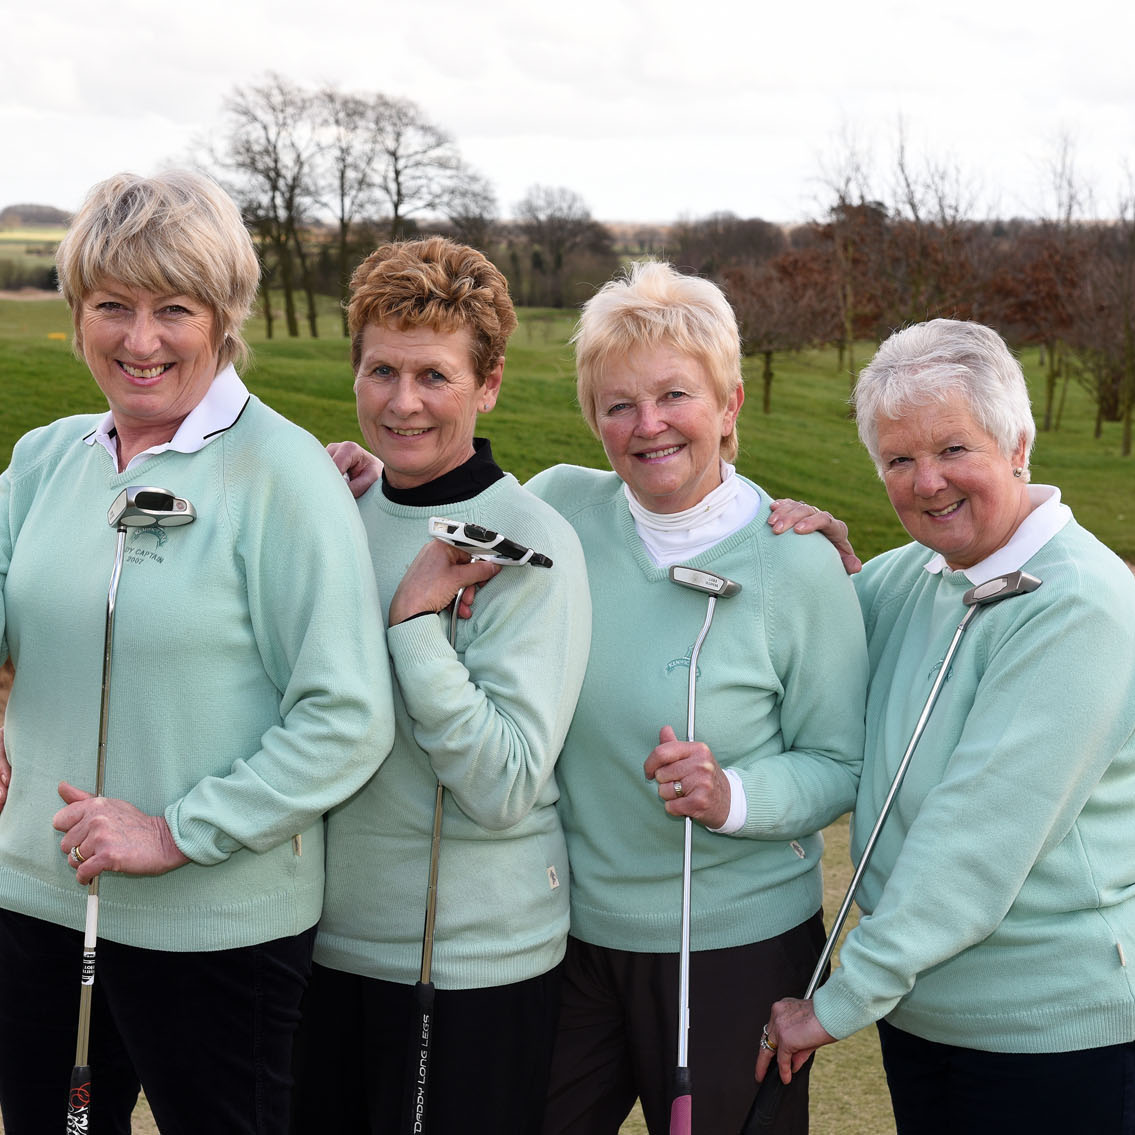 Louth Lady Golfers - Lens Replacement Surgery